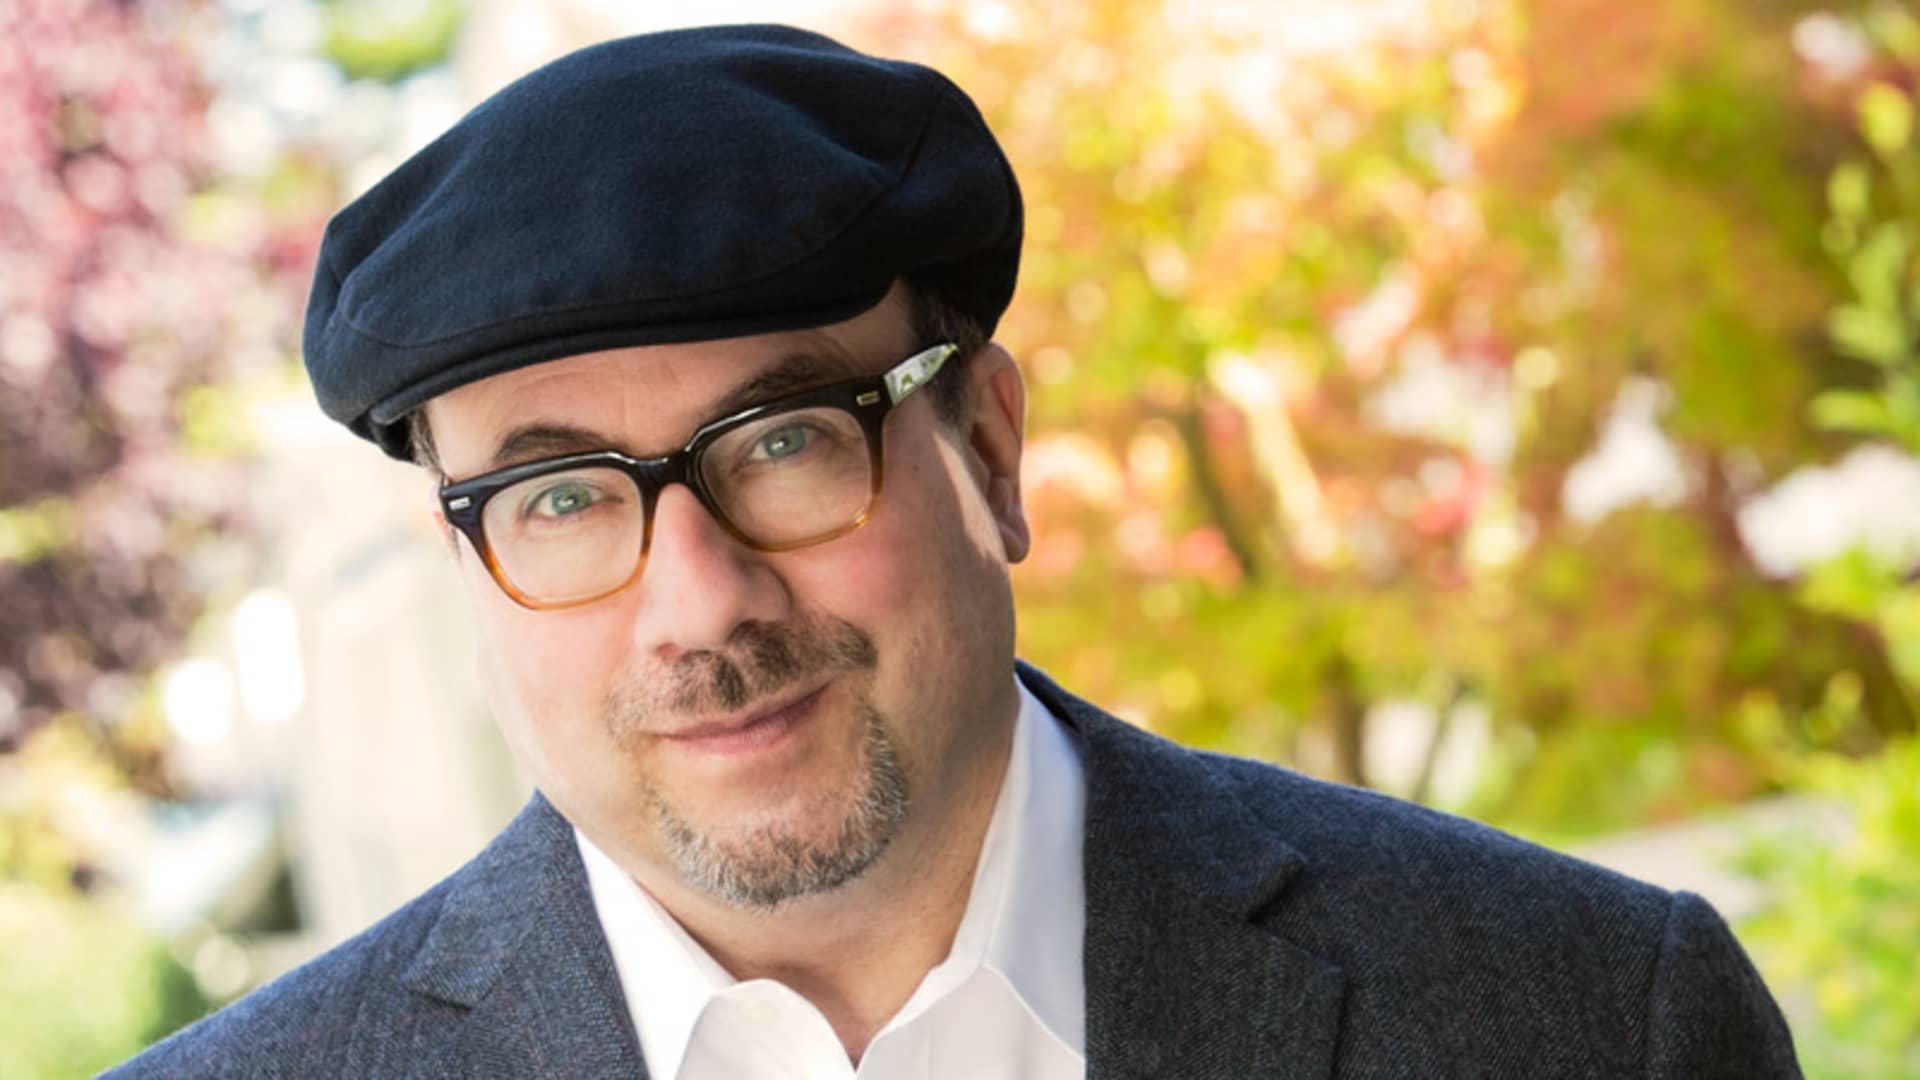 Craigslist founder Craig Newmark is pouring millions of dollars into combating AI’s dark side